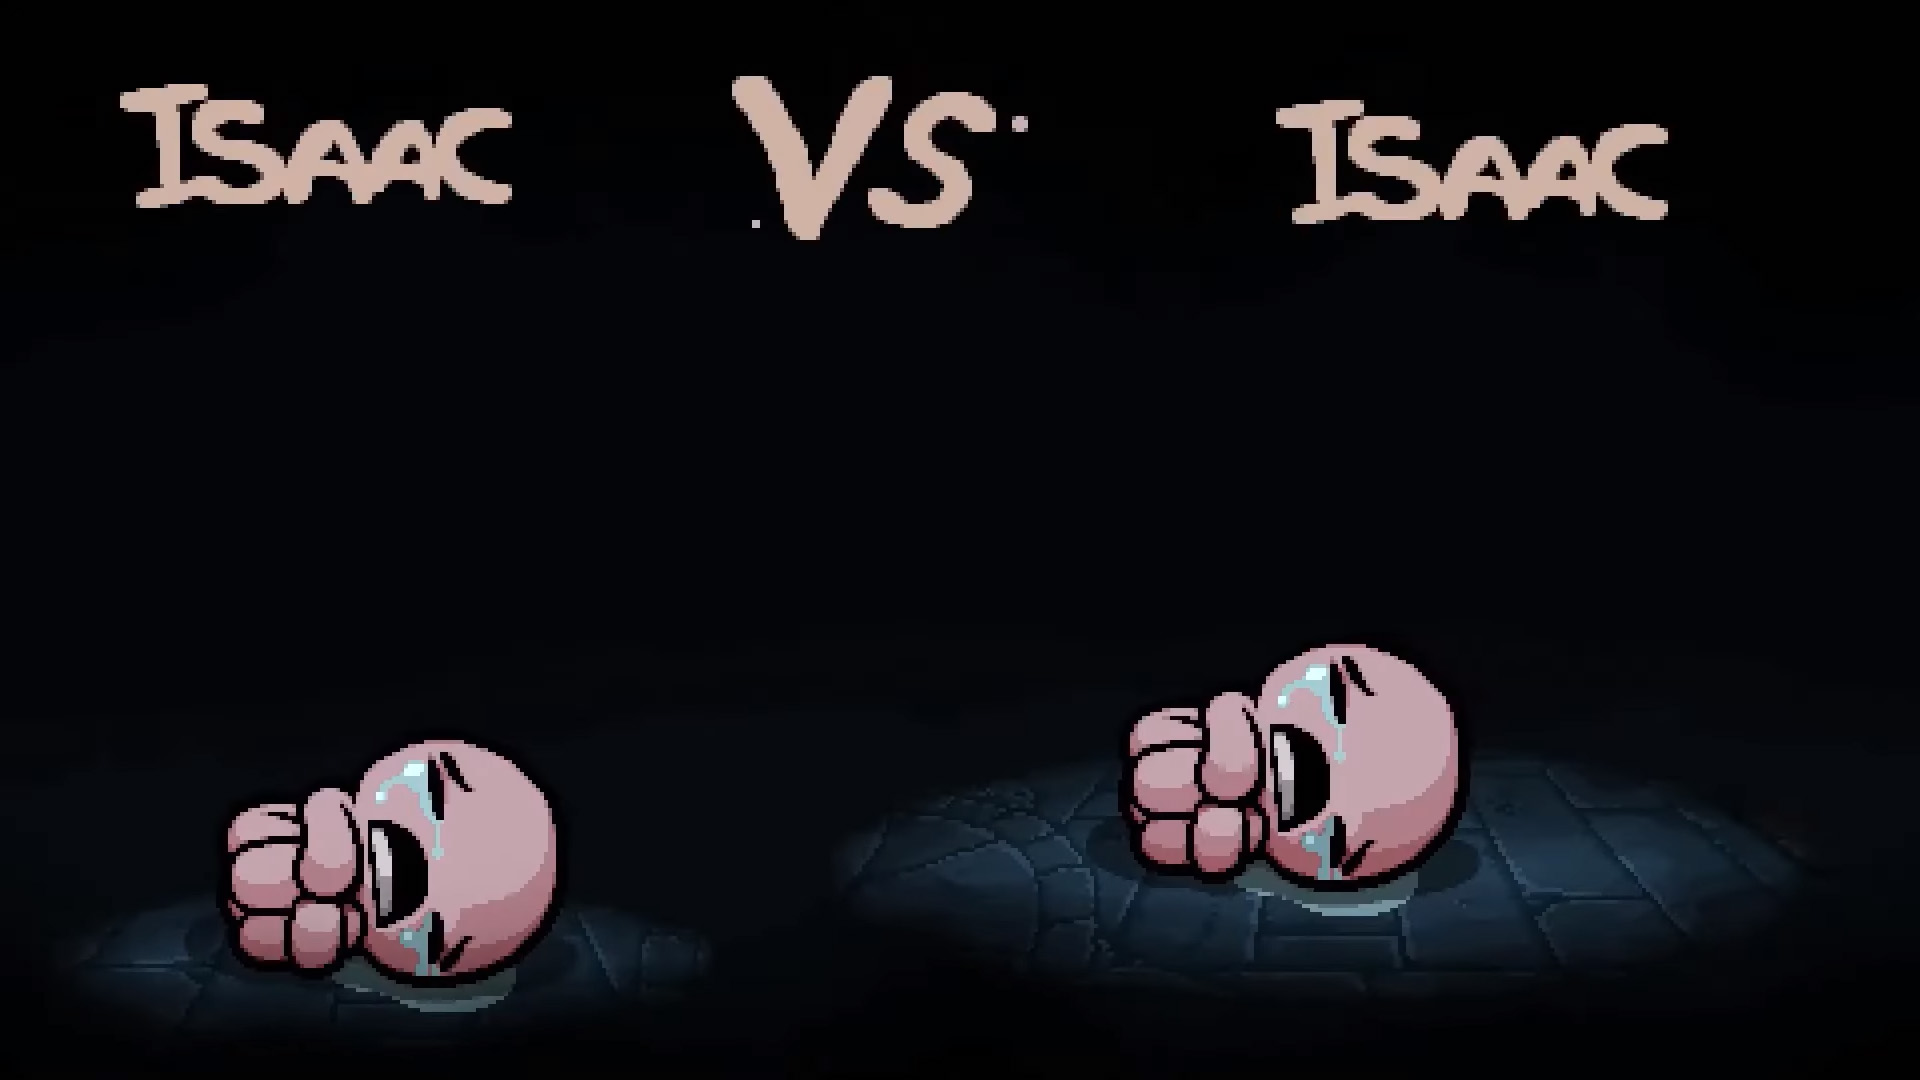 binding of isaac rebirth console command